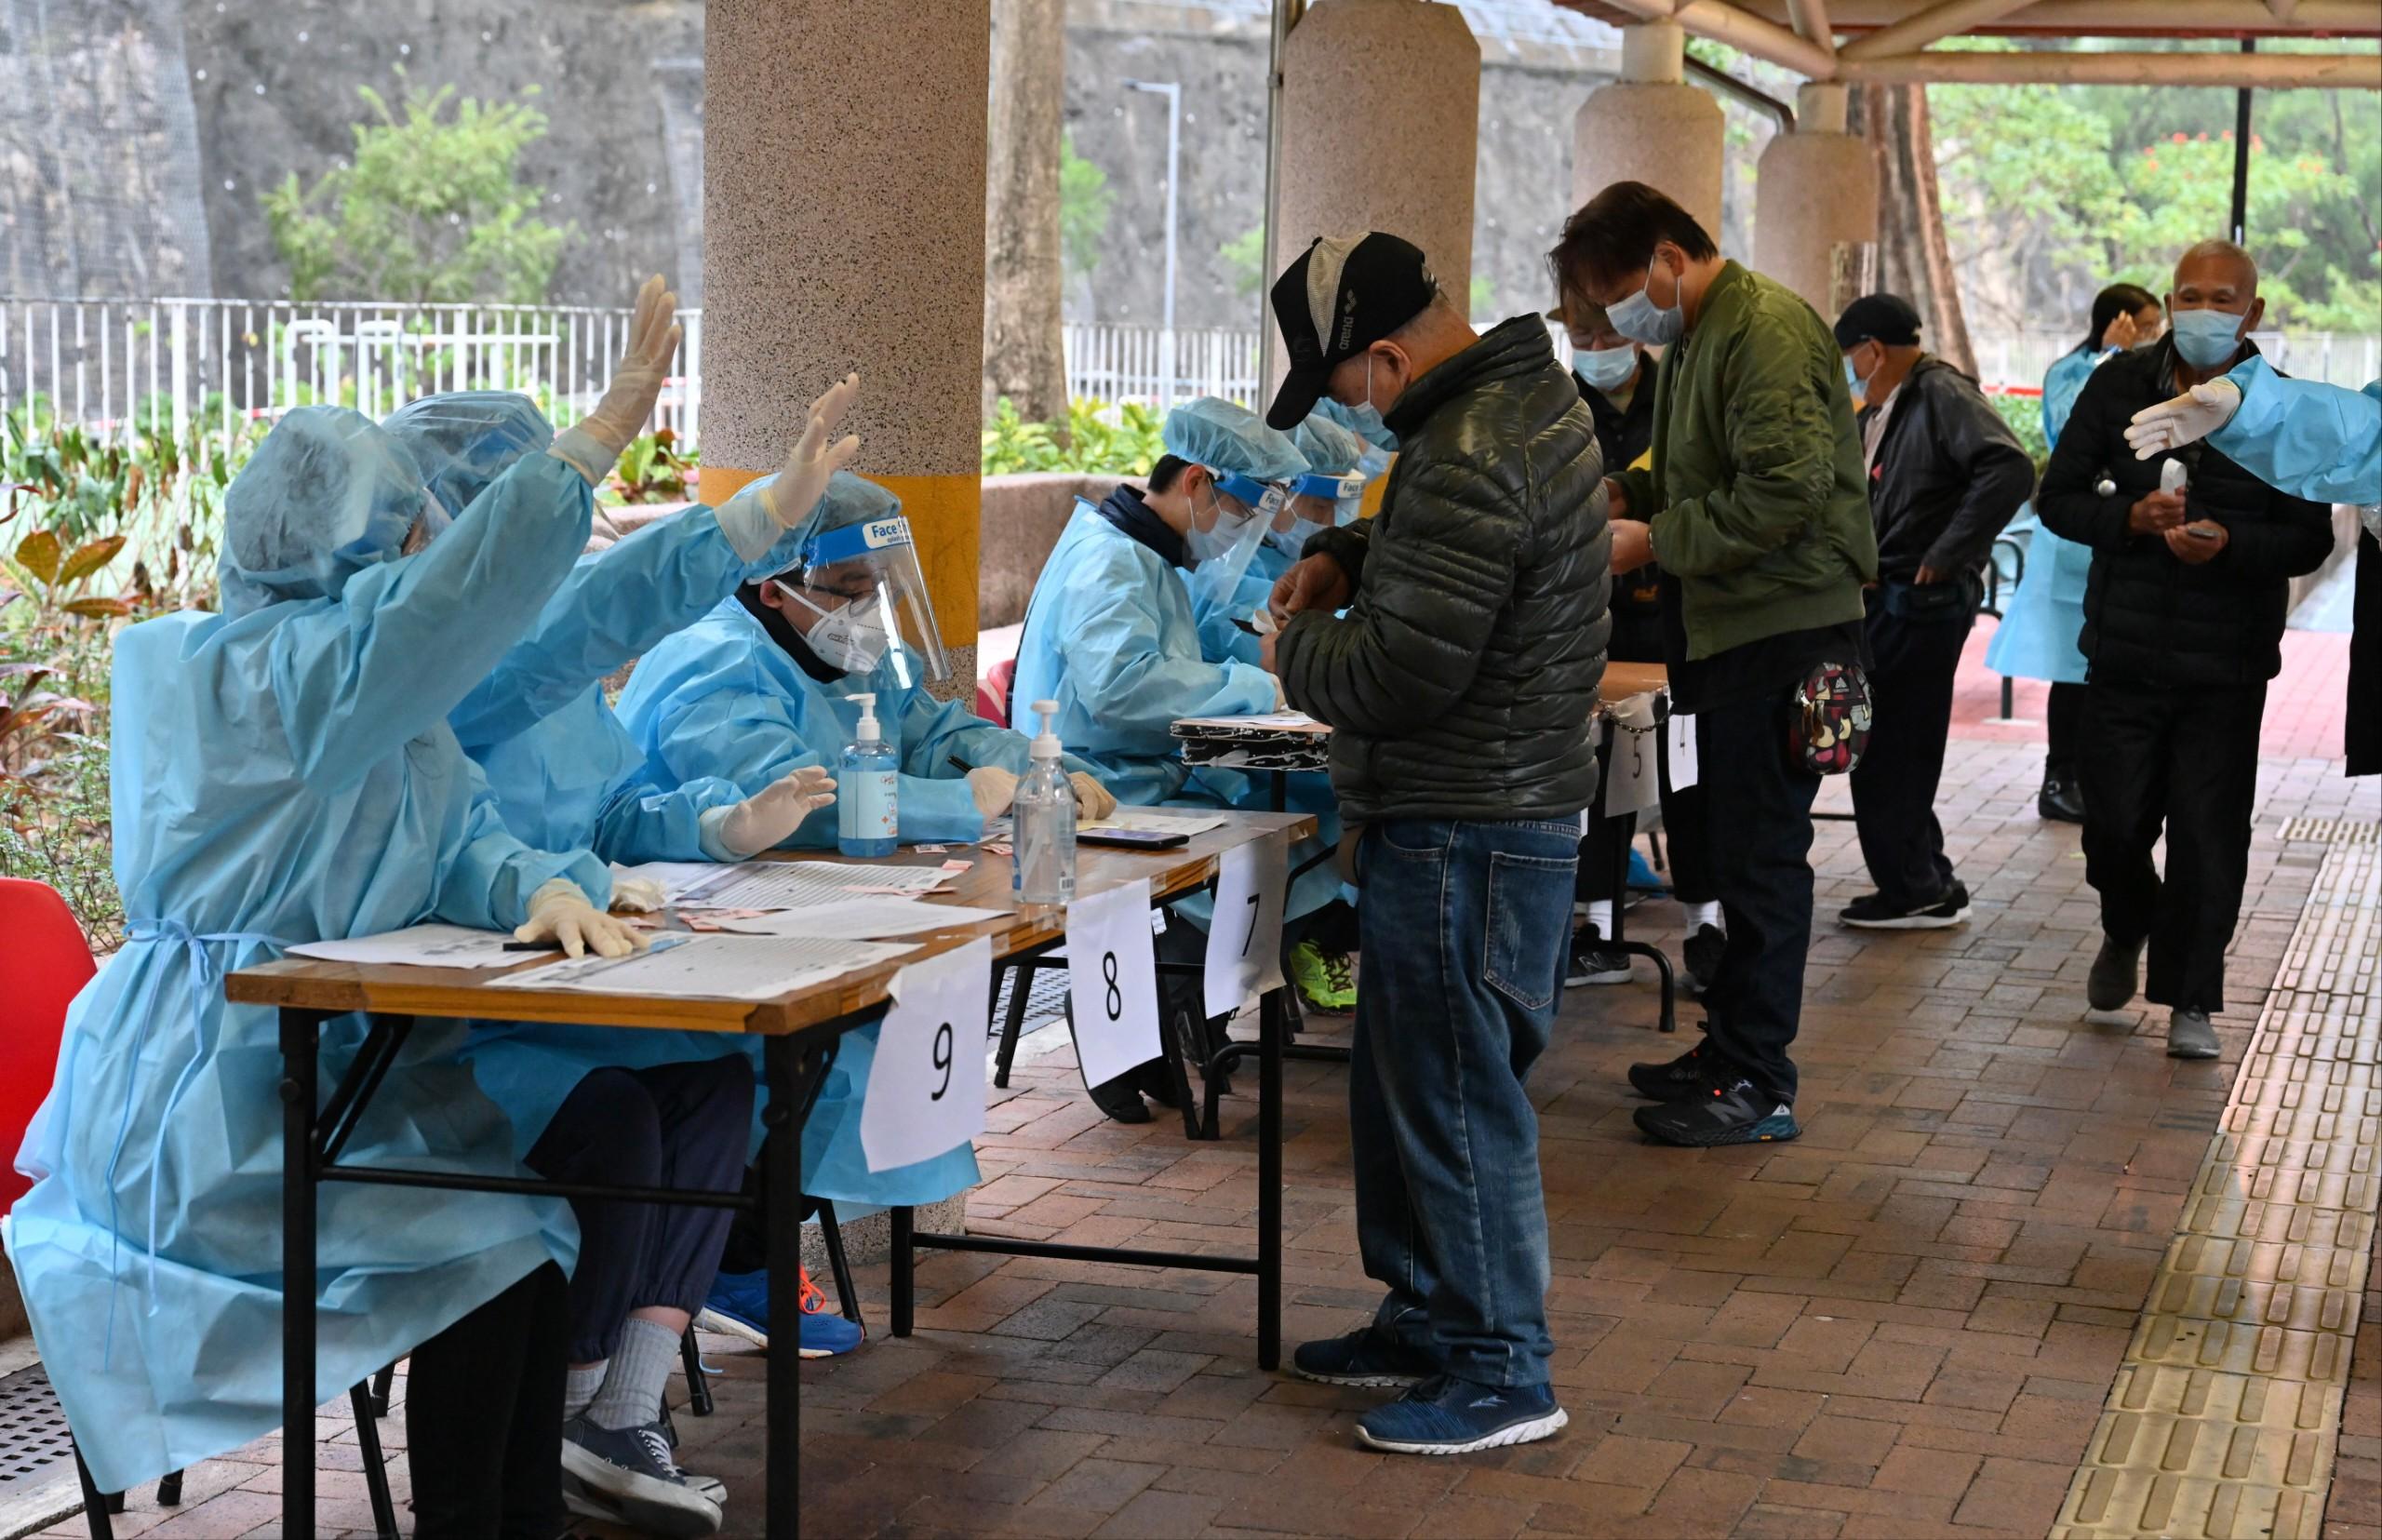 The Government yesterday (February 2) made a "restriction-testing declaration" and issued a compulsory testing notice in respect of  Yam Yue House, Shek Yam East Estate. Photo shows staff members of the Housing Department checking whether persons in the "restricted area" have undergone compulsory testing in the enforcement operation.